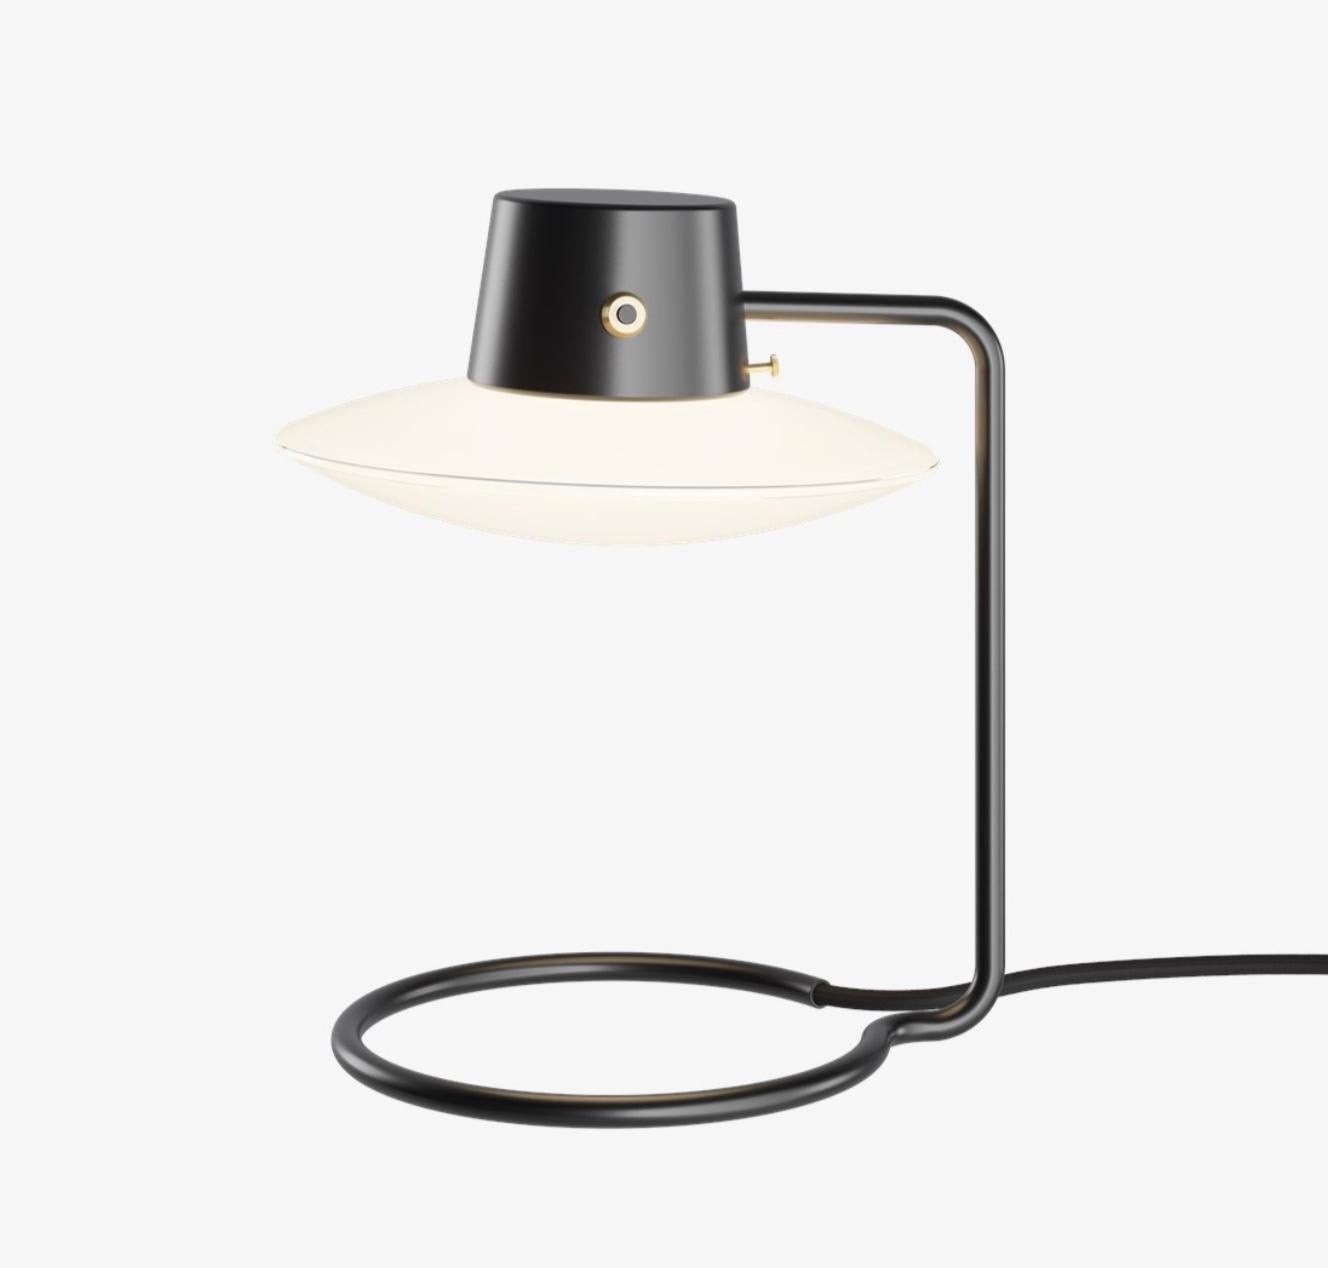 Arne Jacobsen AJ Oxford table lamp 280mm in black and opaline for Louis Poulsen. Designed in 1963, current production.

The AJ Oxford table lamp has a sleek graphic expression, which reflects the architecture of St Catherine's College, in Oxford,